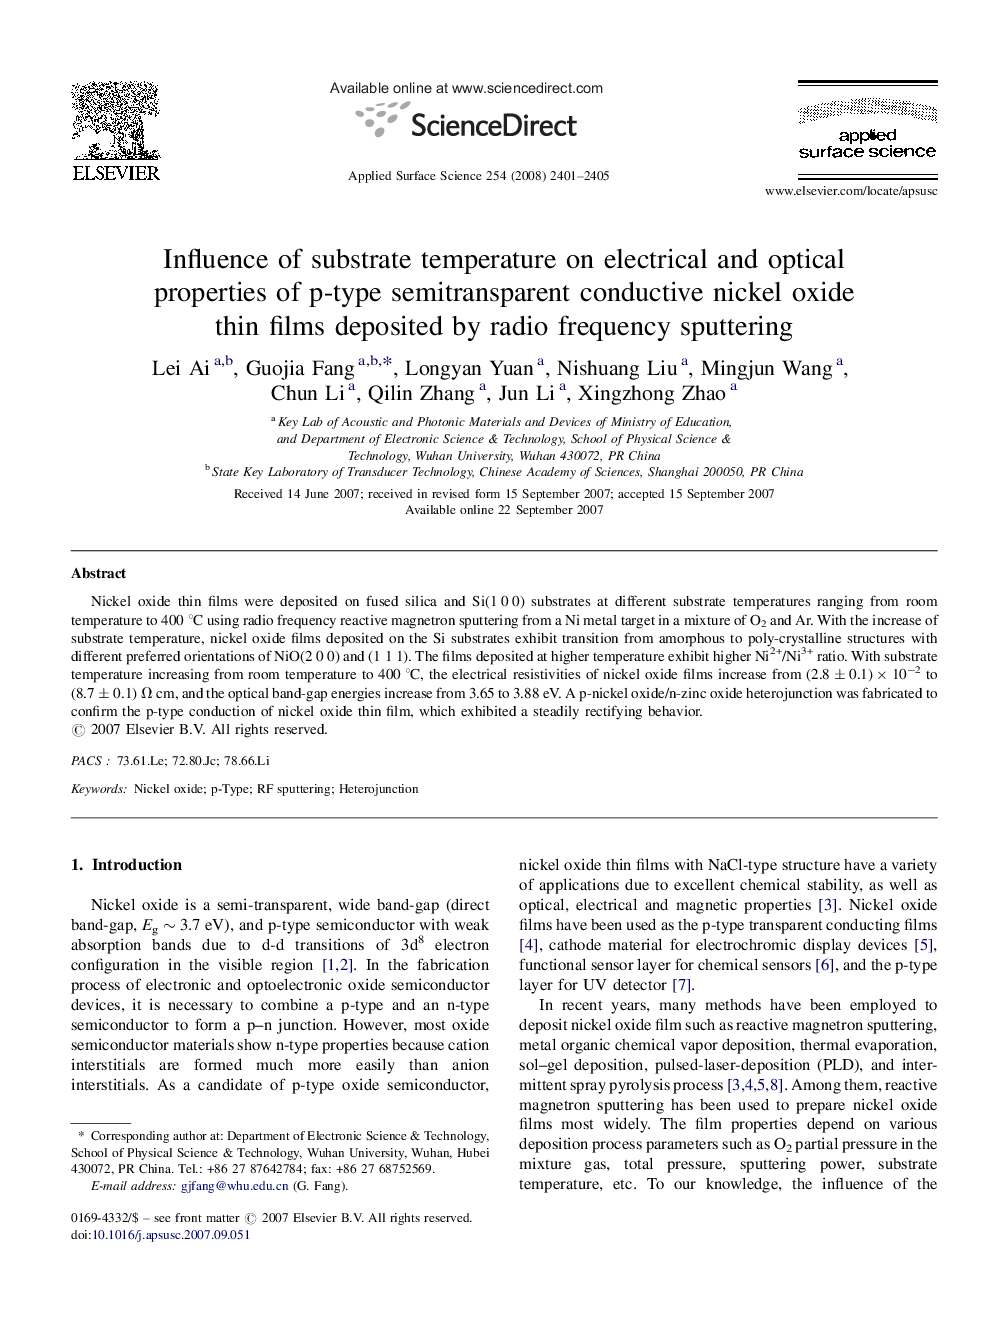 Influence of substrate temperature on electrical and optical properties of p-type semitransparent conductive nickel oxide thin films deposited by radio frequency sputtering